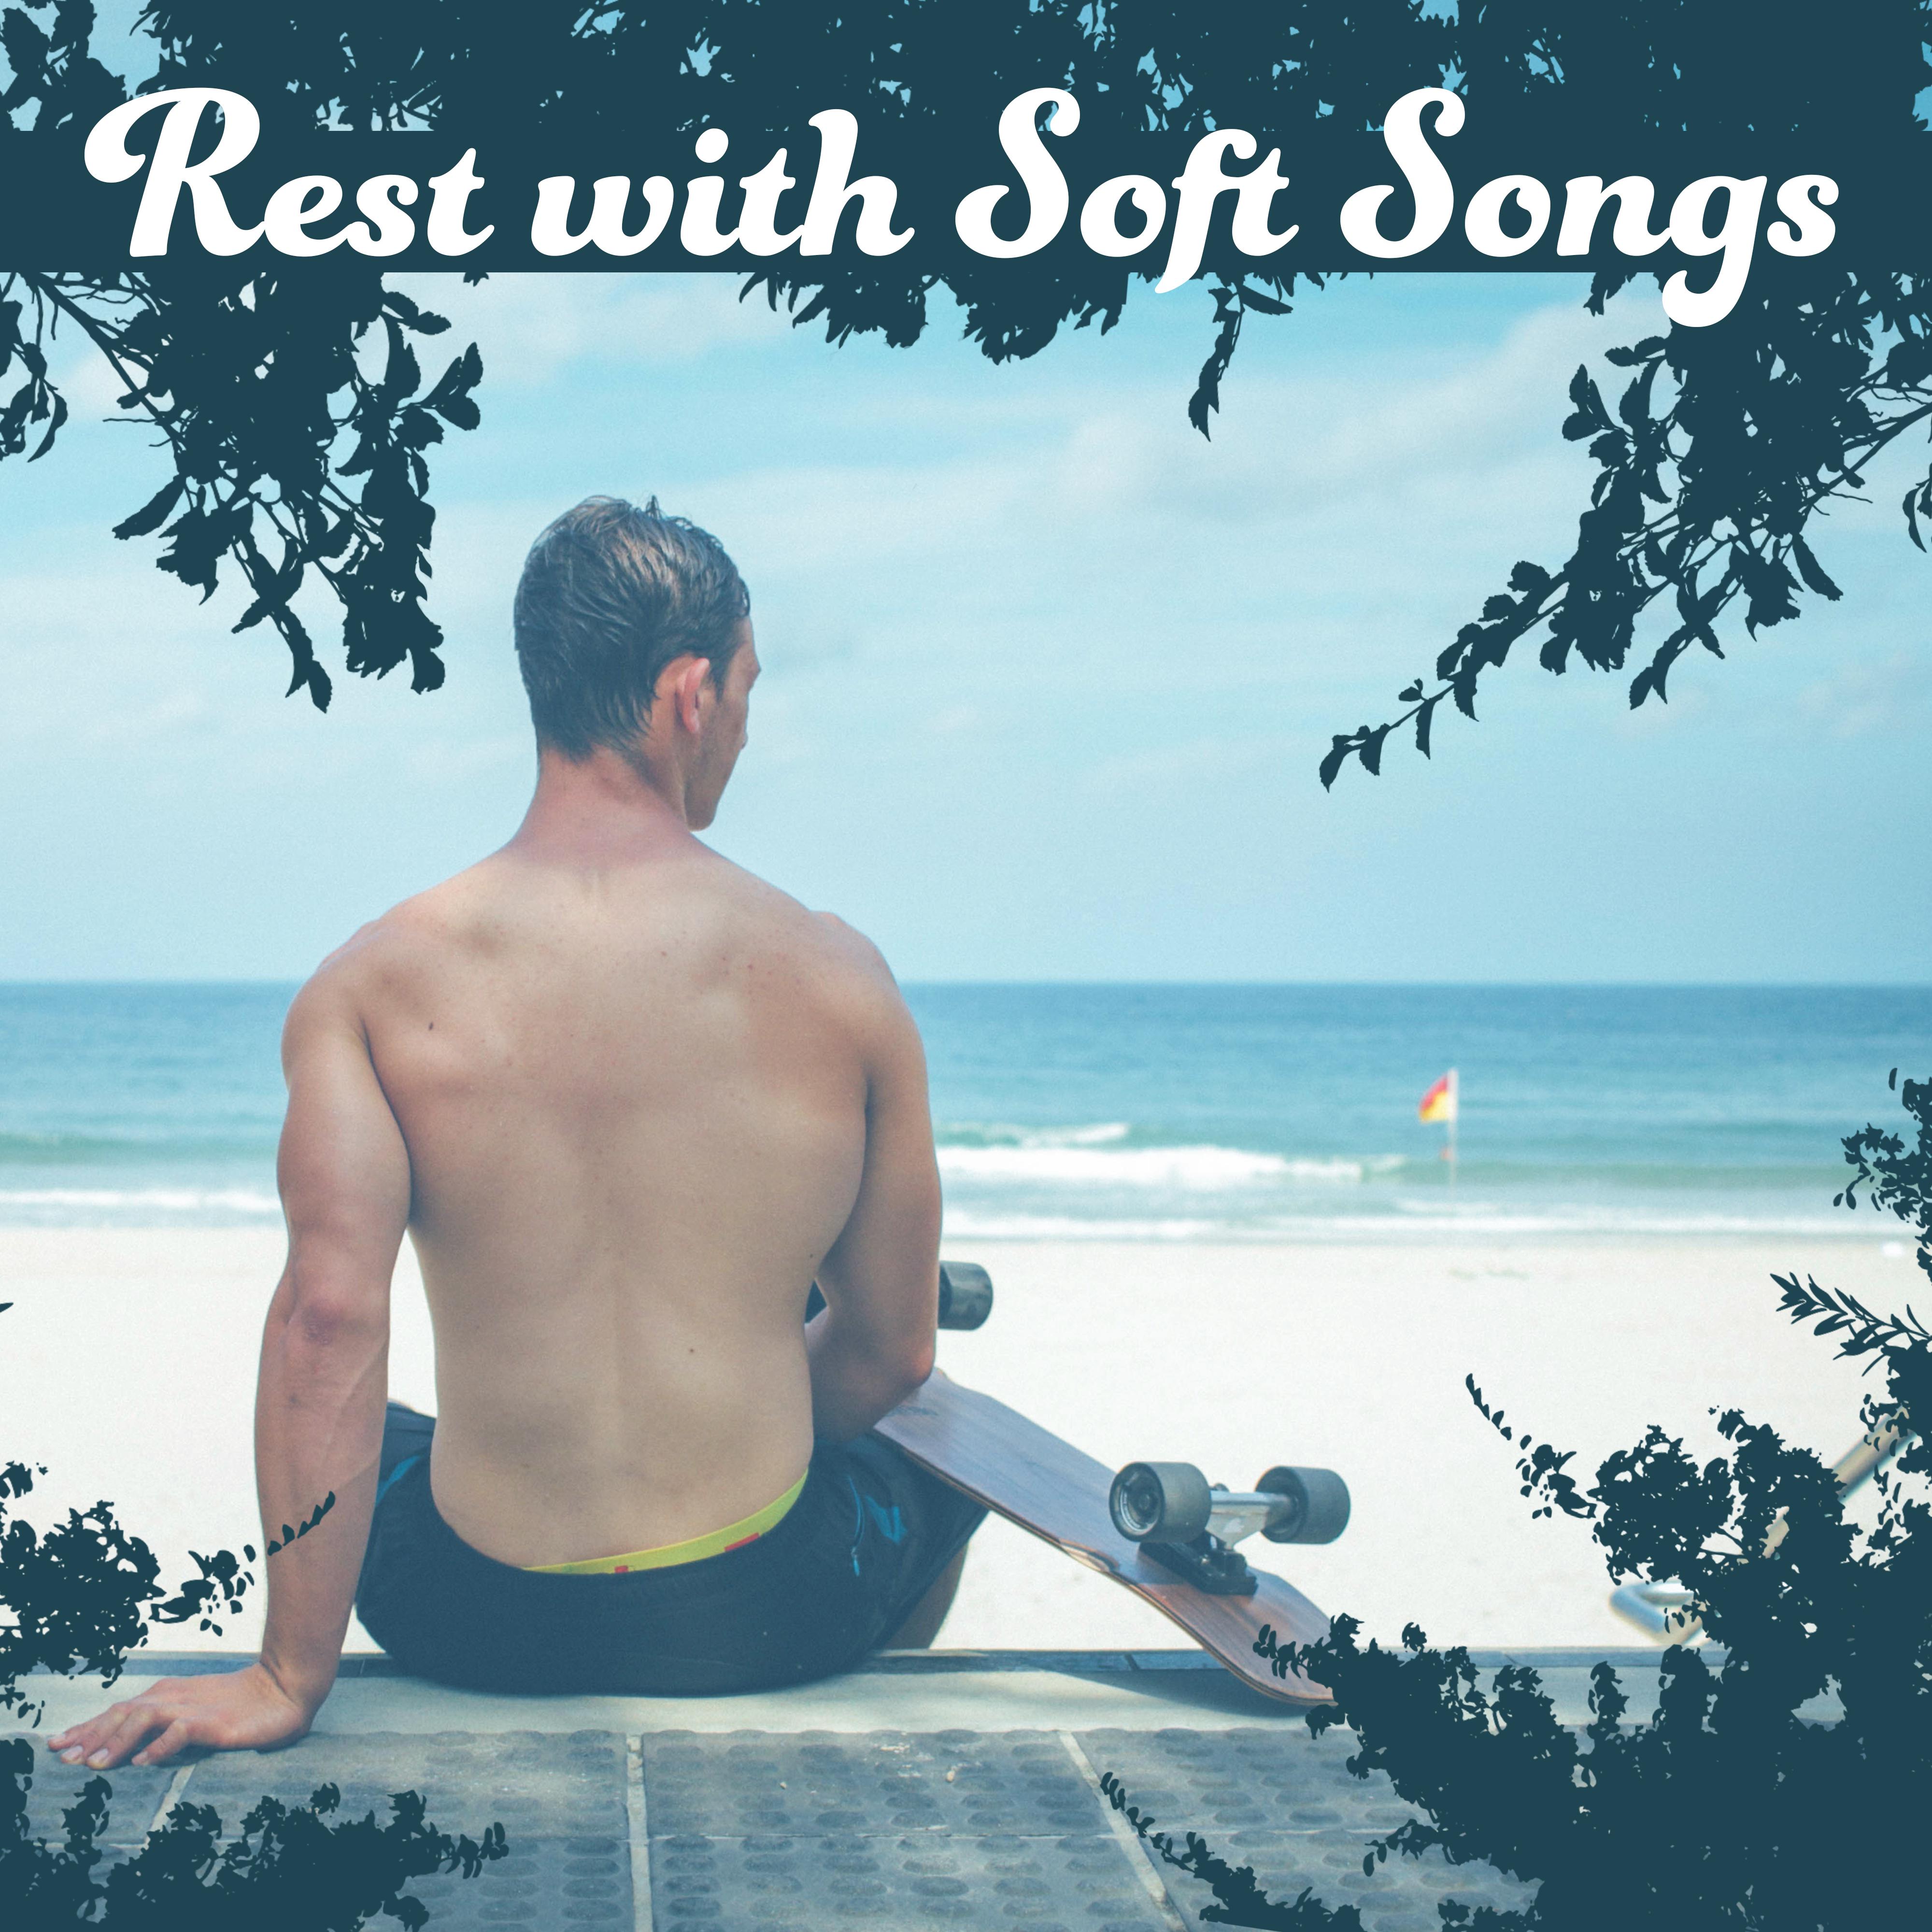 Rest with Soft Songs – Relaxing New Age Music, Sounds to Calm Your Mind, Peaceful Night